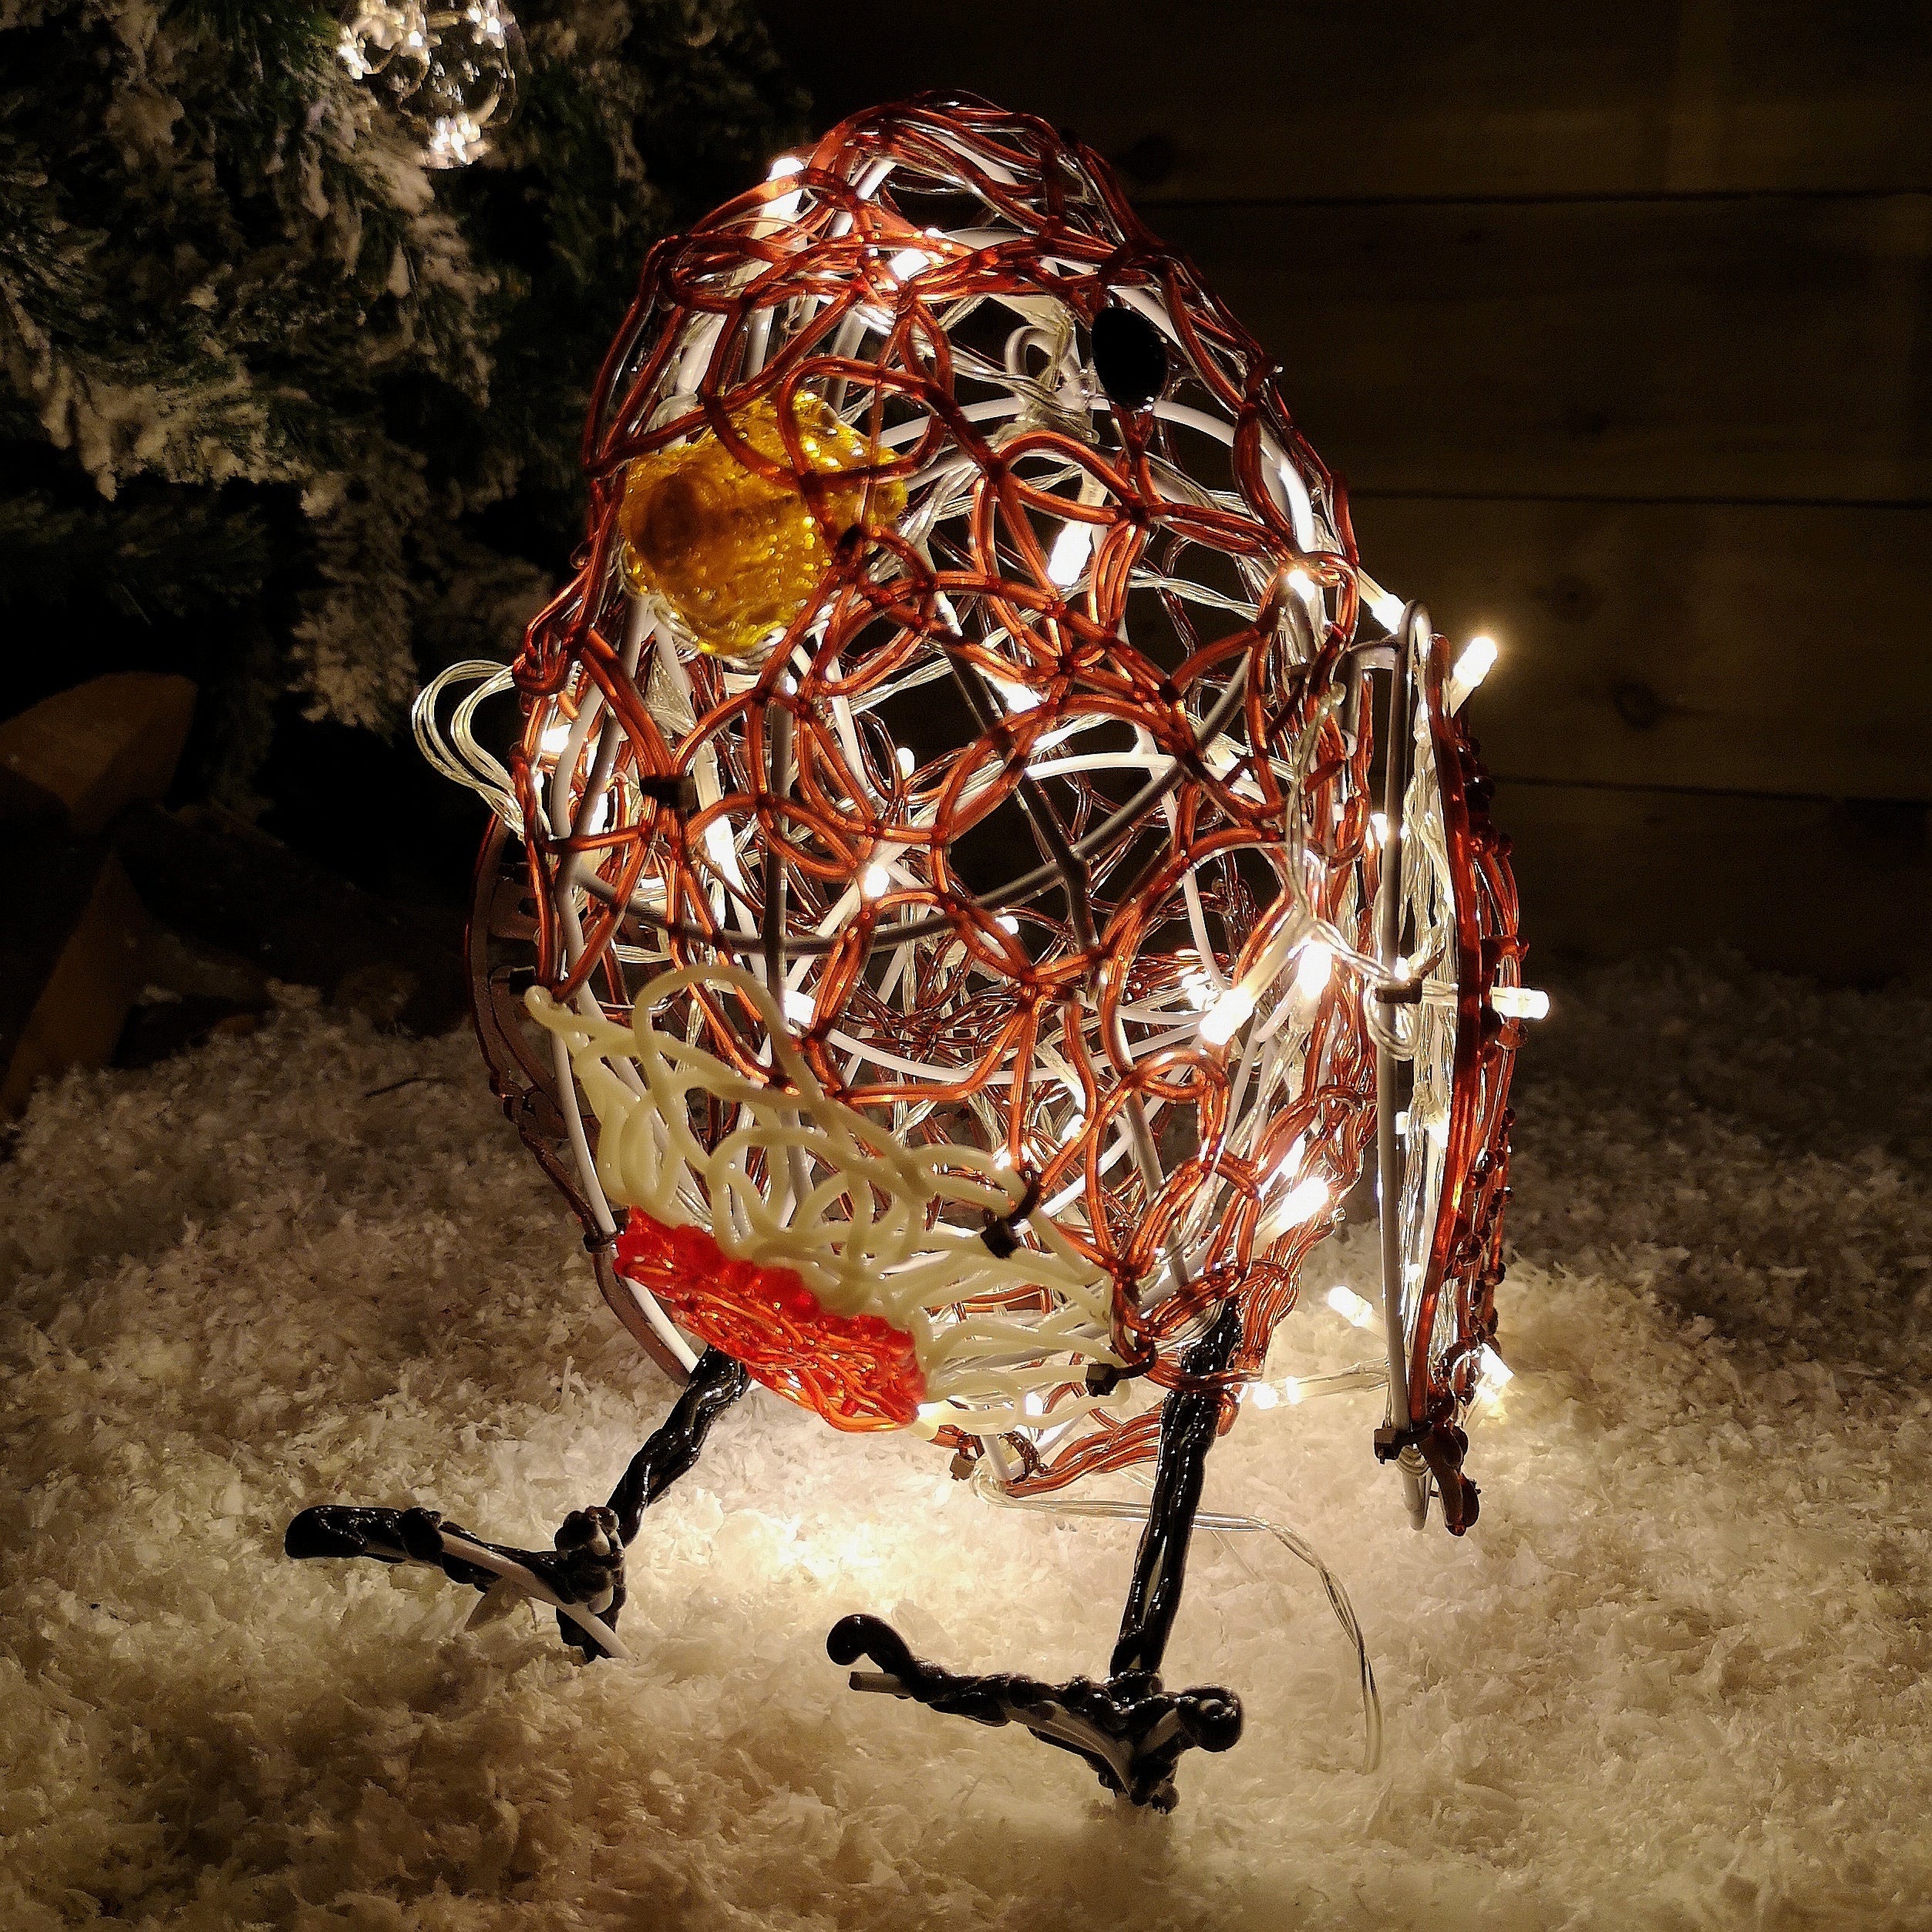 30cm Premier Soft Acrylic Outdoor Lit Christmas Robin with 60 Warm White LEDs